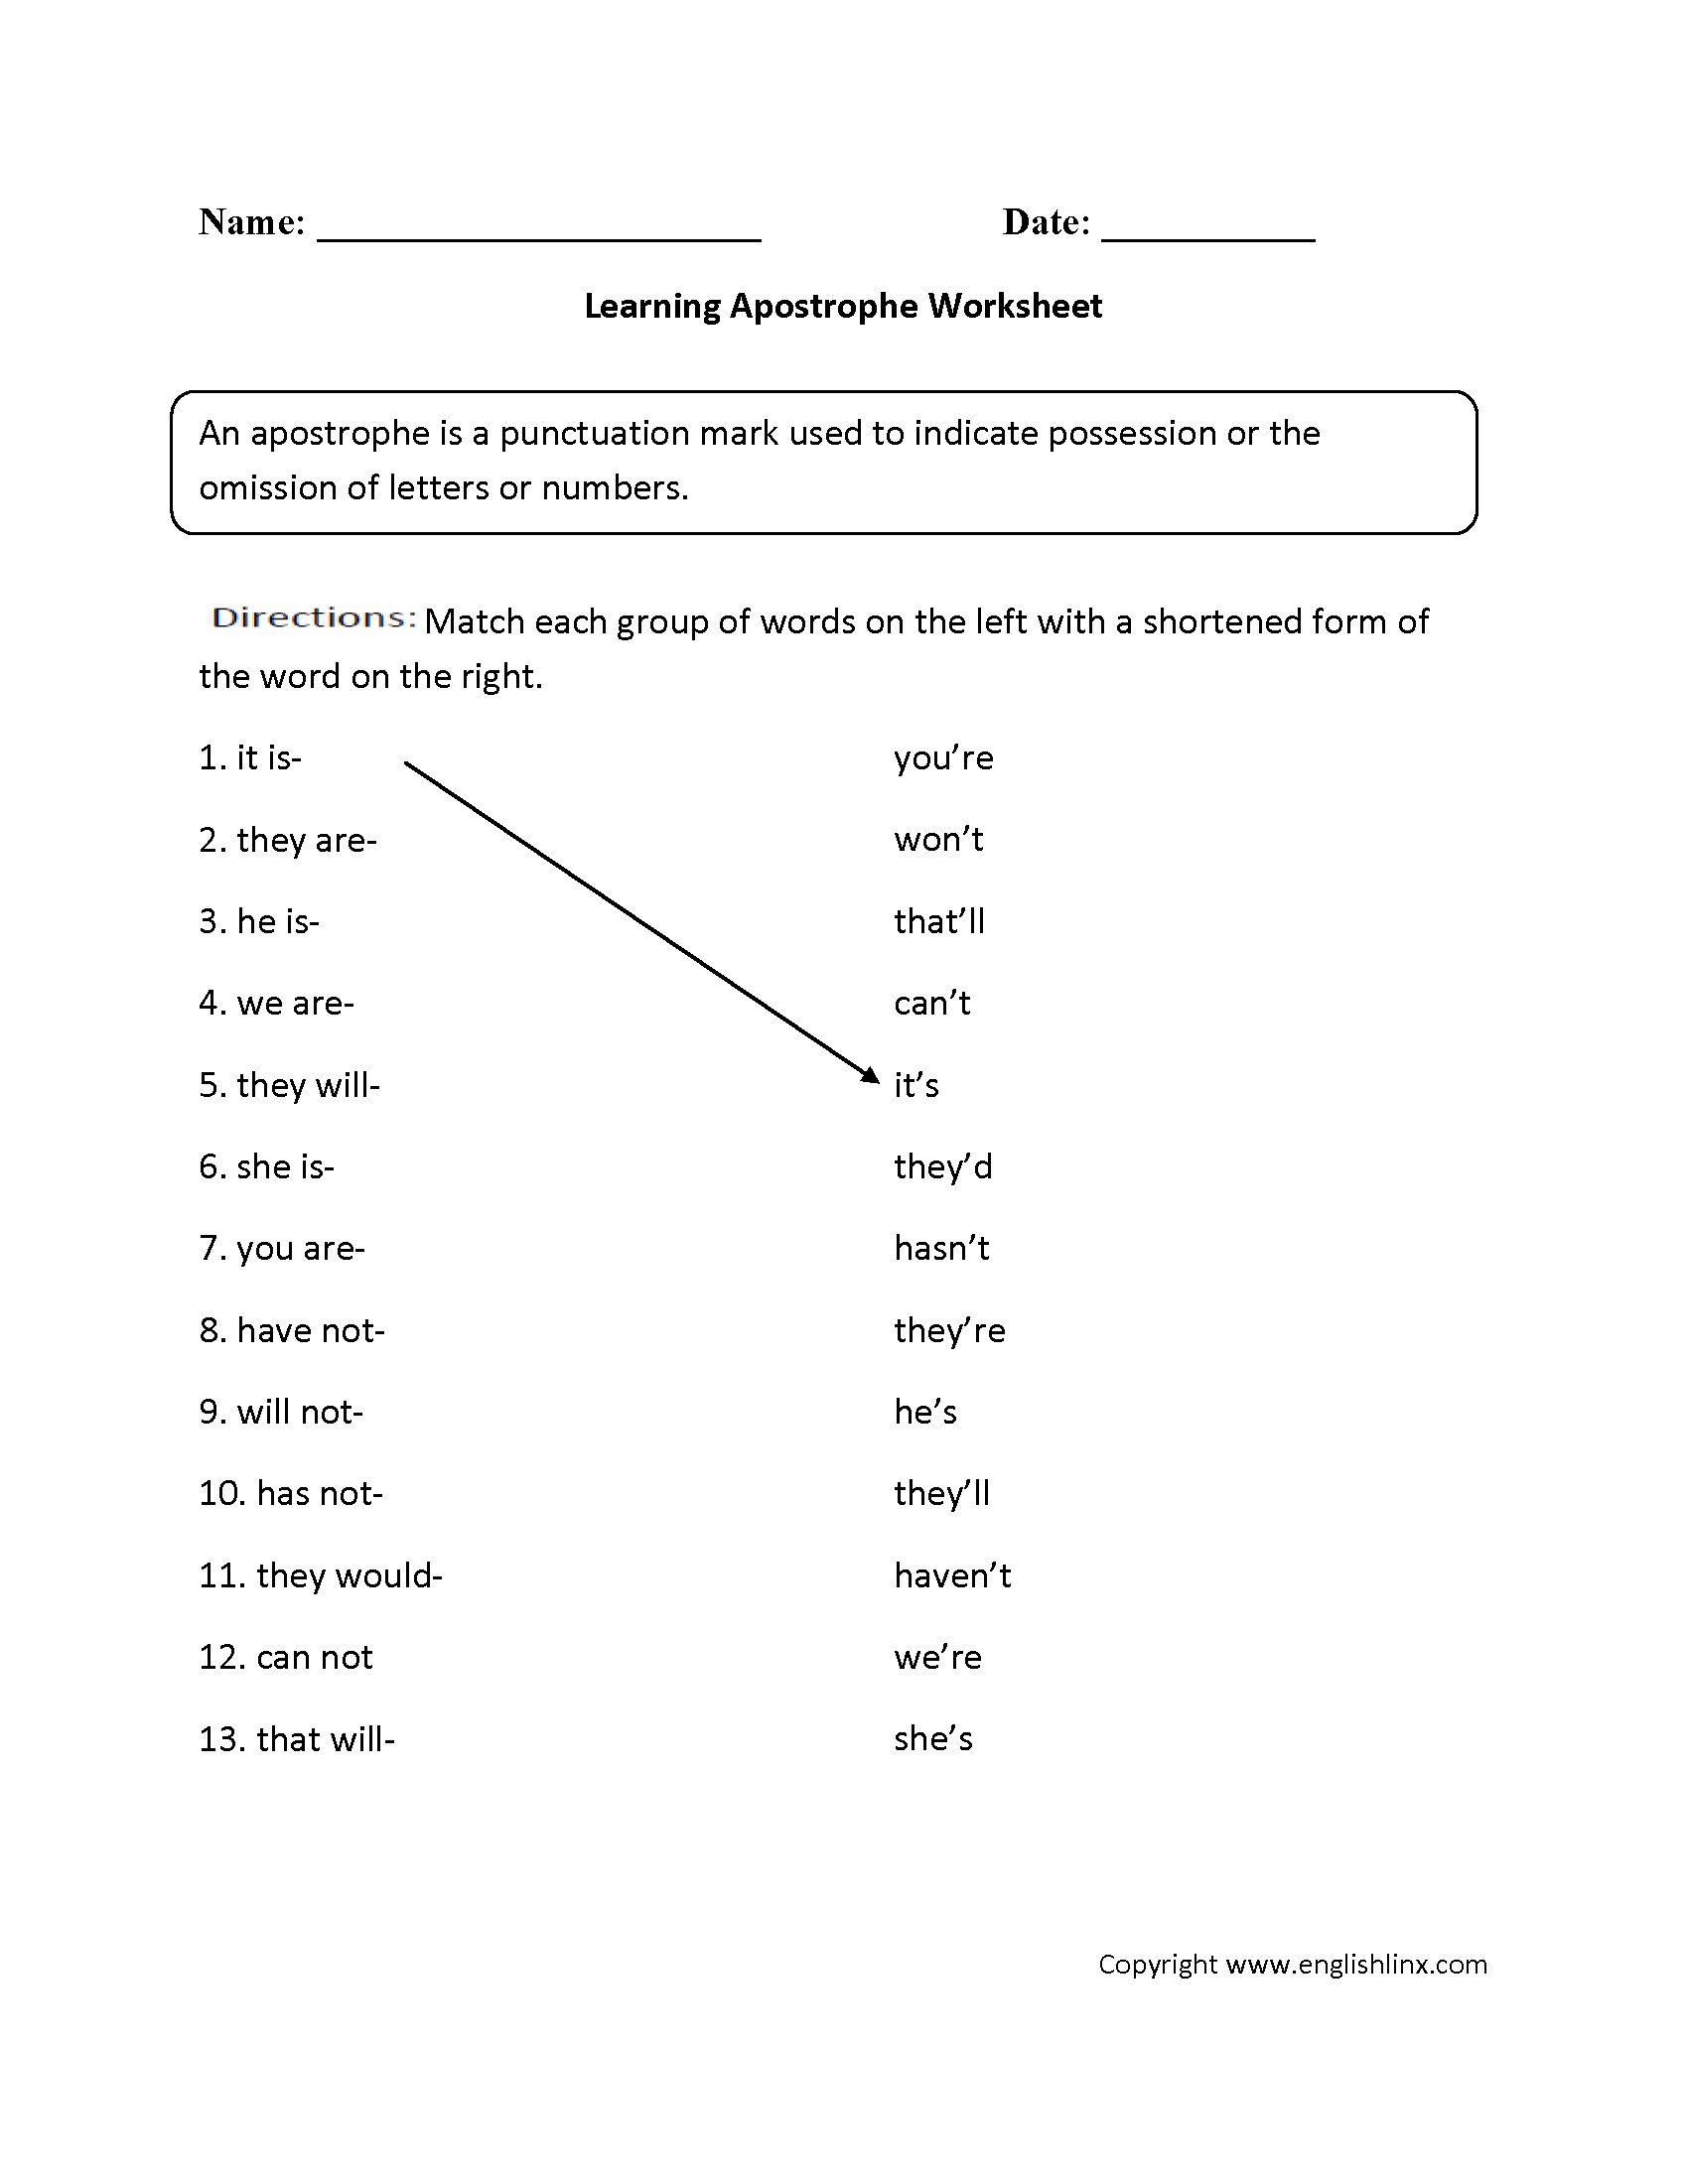 Learning Apostrophe Worksheets